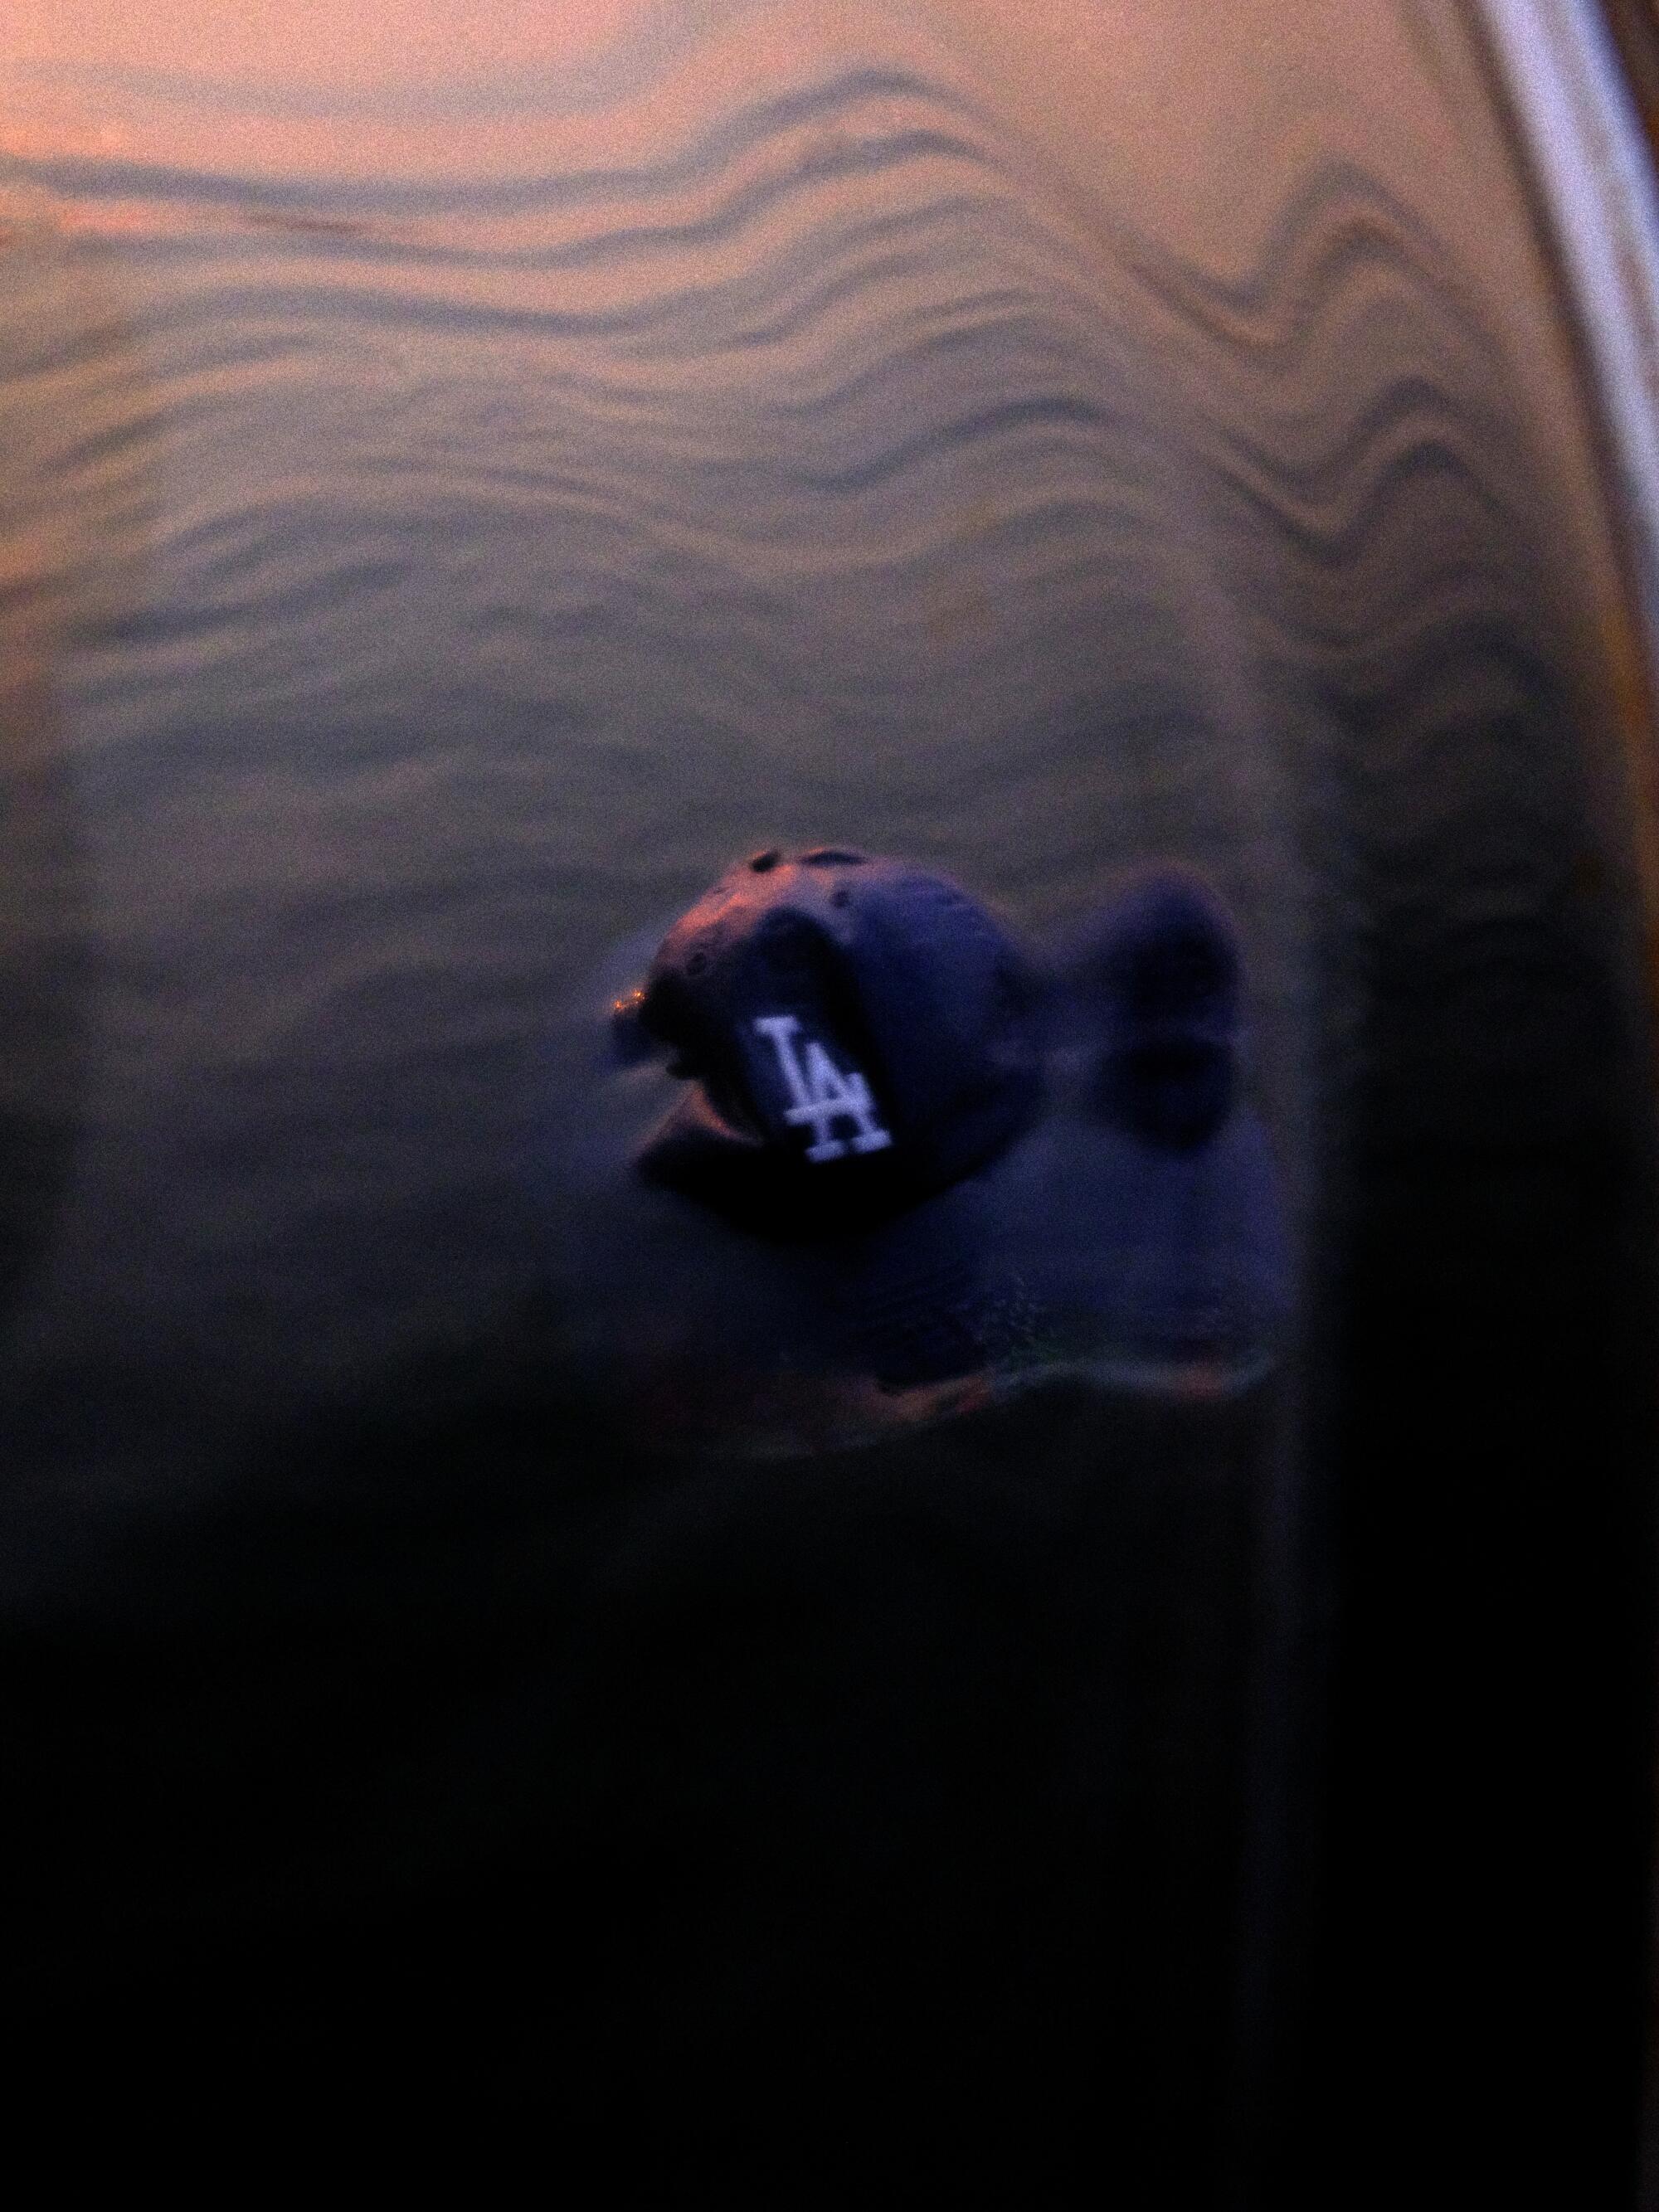 An image of a Dodgers hat floating in the water